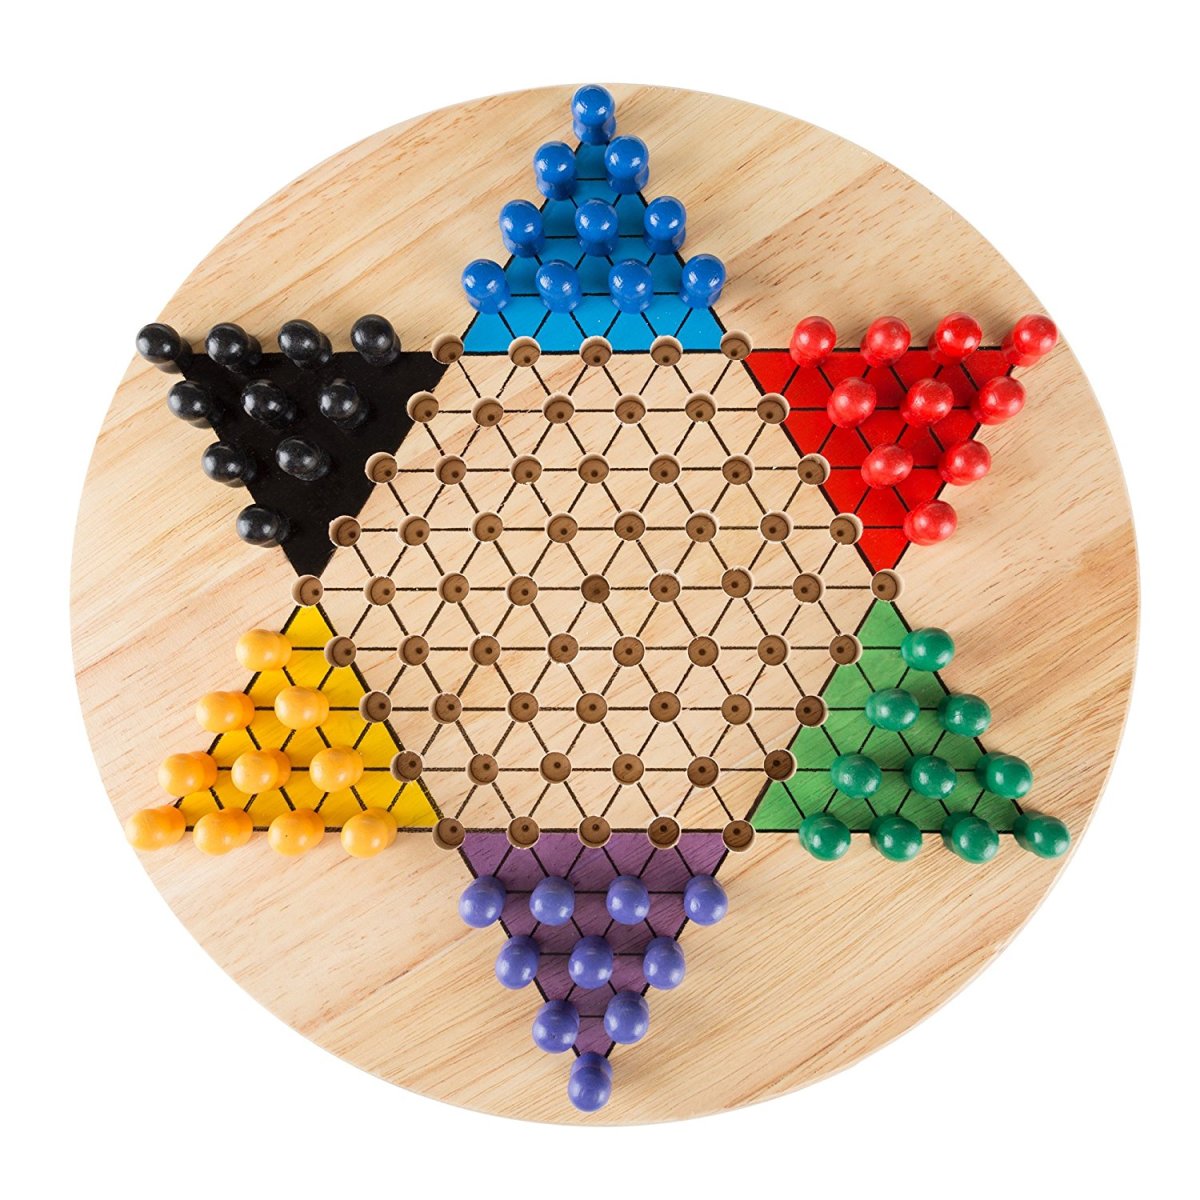 Chinese Checkers With Pegs: Gift Idea for Less Nimble Fingers